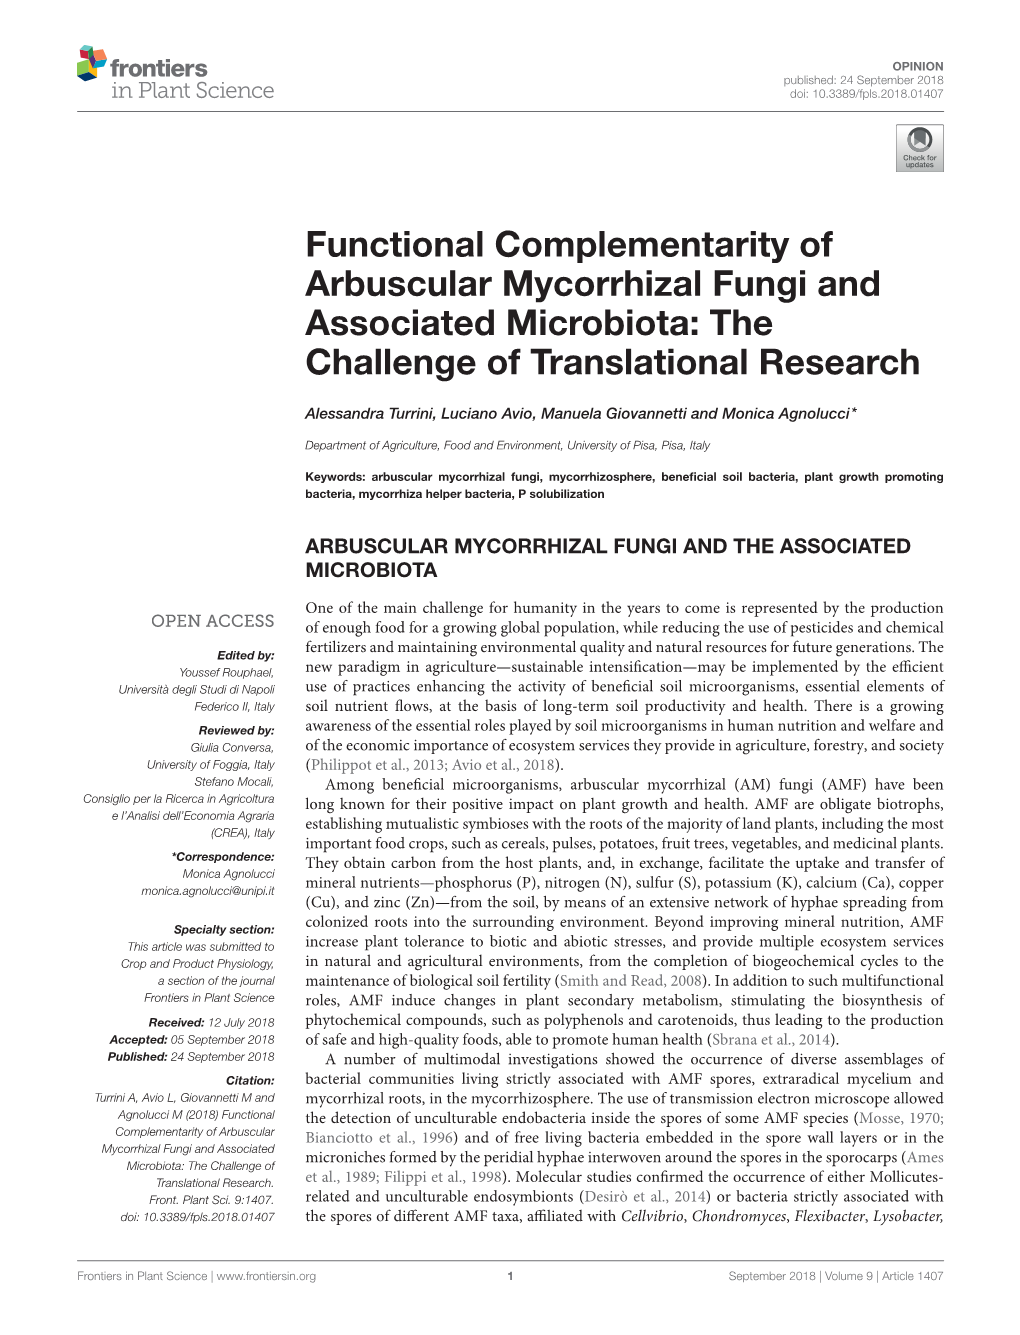 Functional Complementarity of Arbuscular Mycorrhizal Fungi and Associated Microbiota: the Challenge of Translational Research